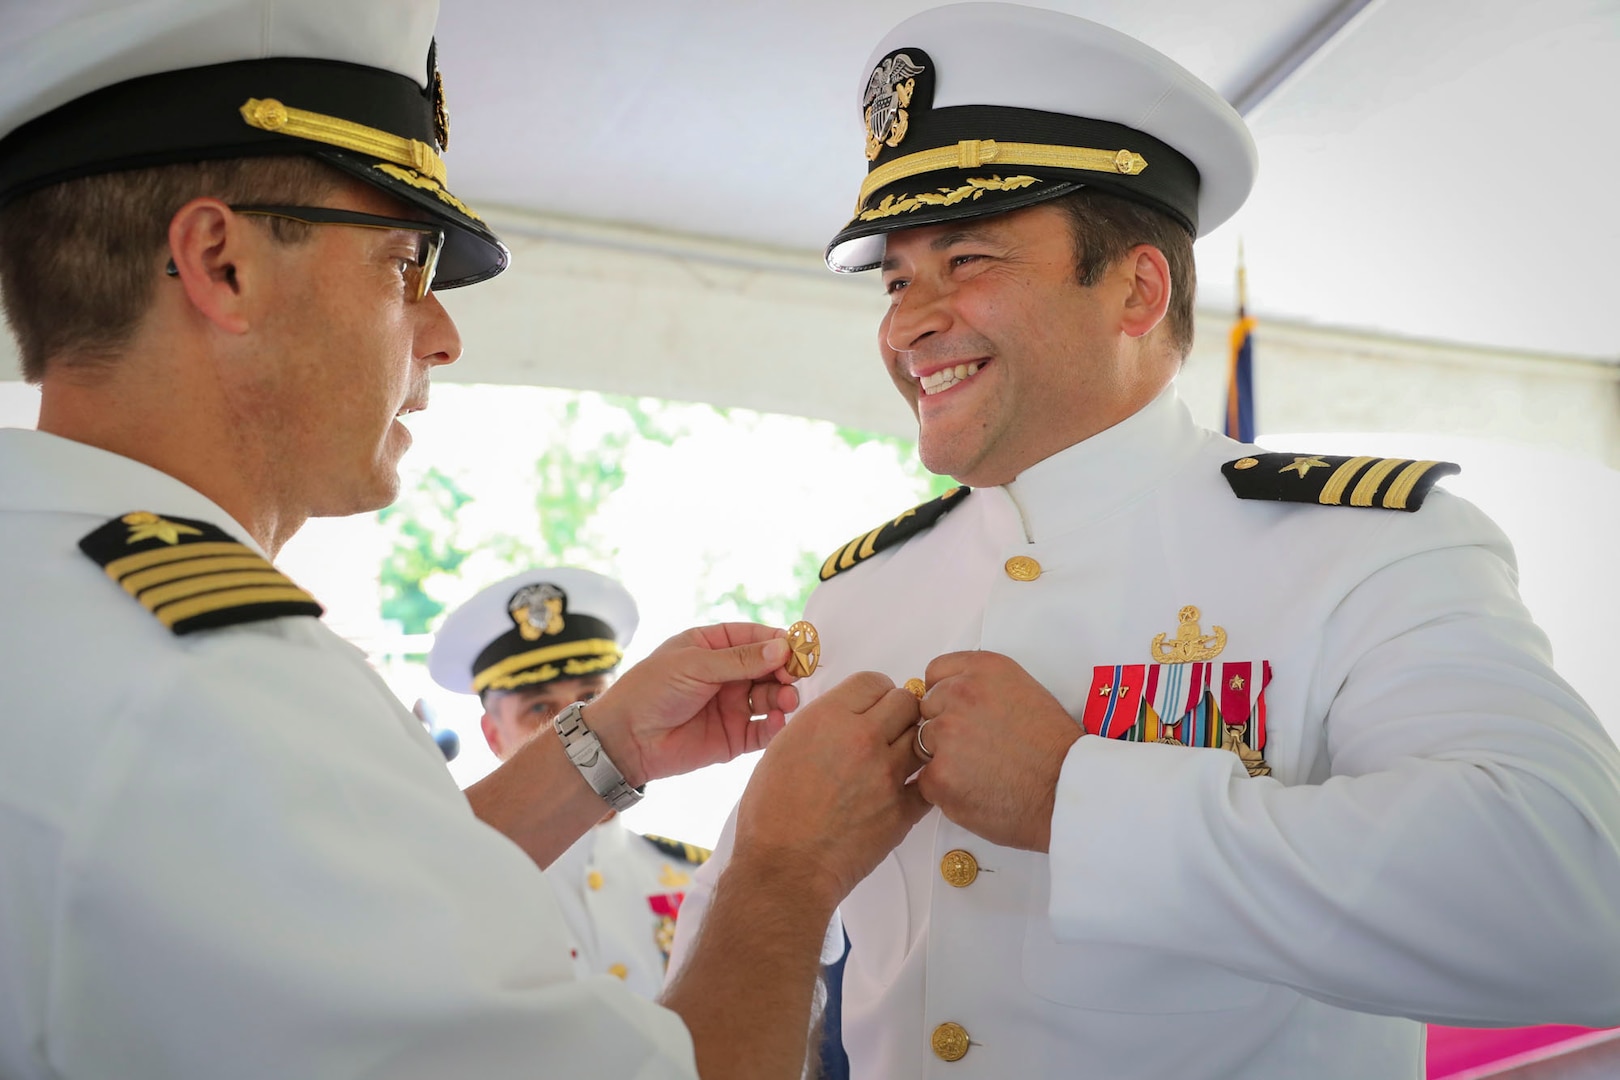 Cmdr. Matthew Myers, EXU-1’s inaugural commanding officer, receives his Command at Sea Insignia denoting his new status as a commanding officer.